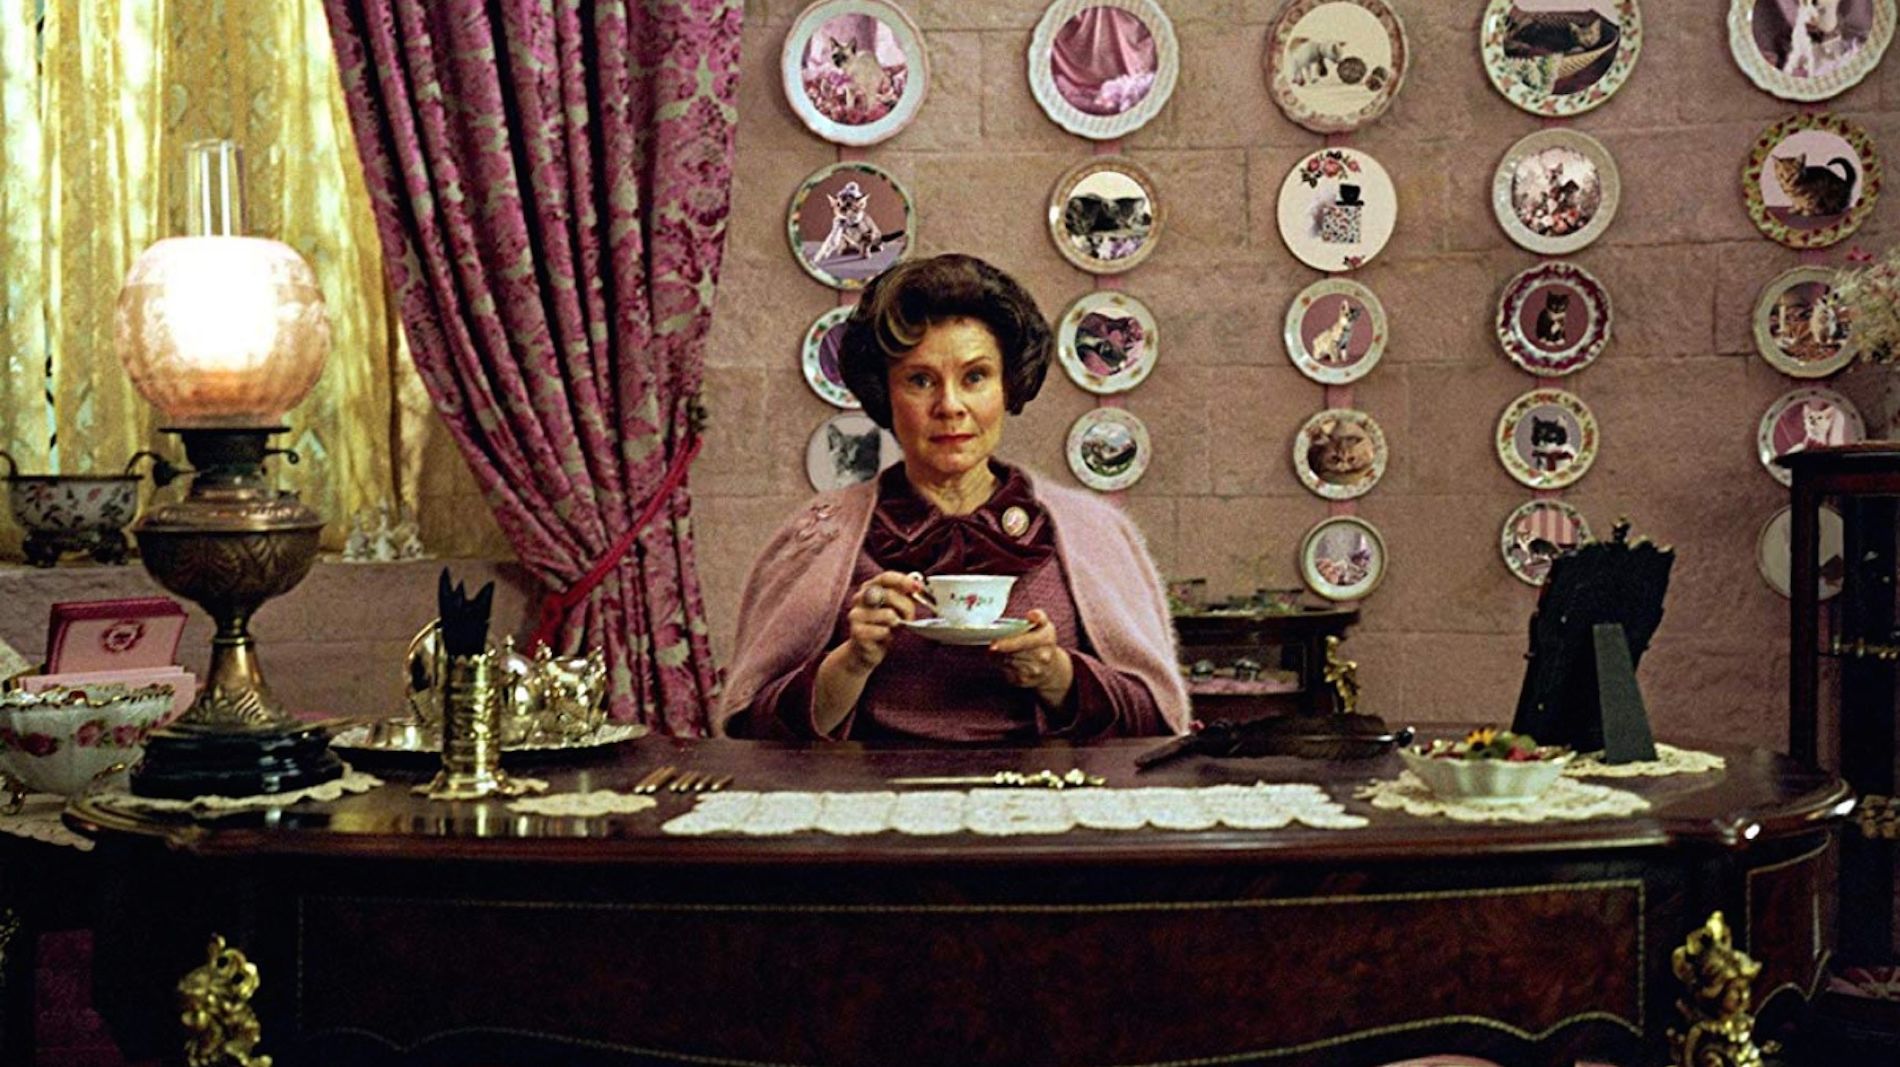 Dolores Umbridge From Harry Potter Was Based on a Real Person | Mental Floss